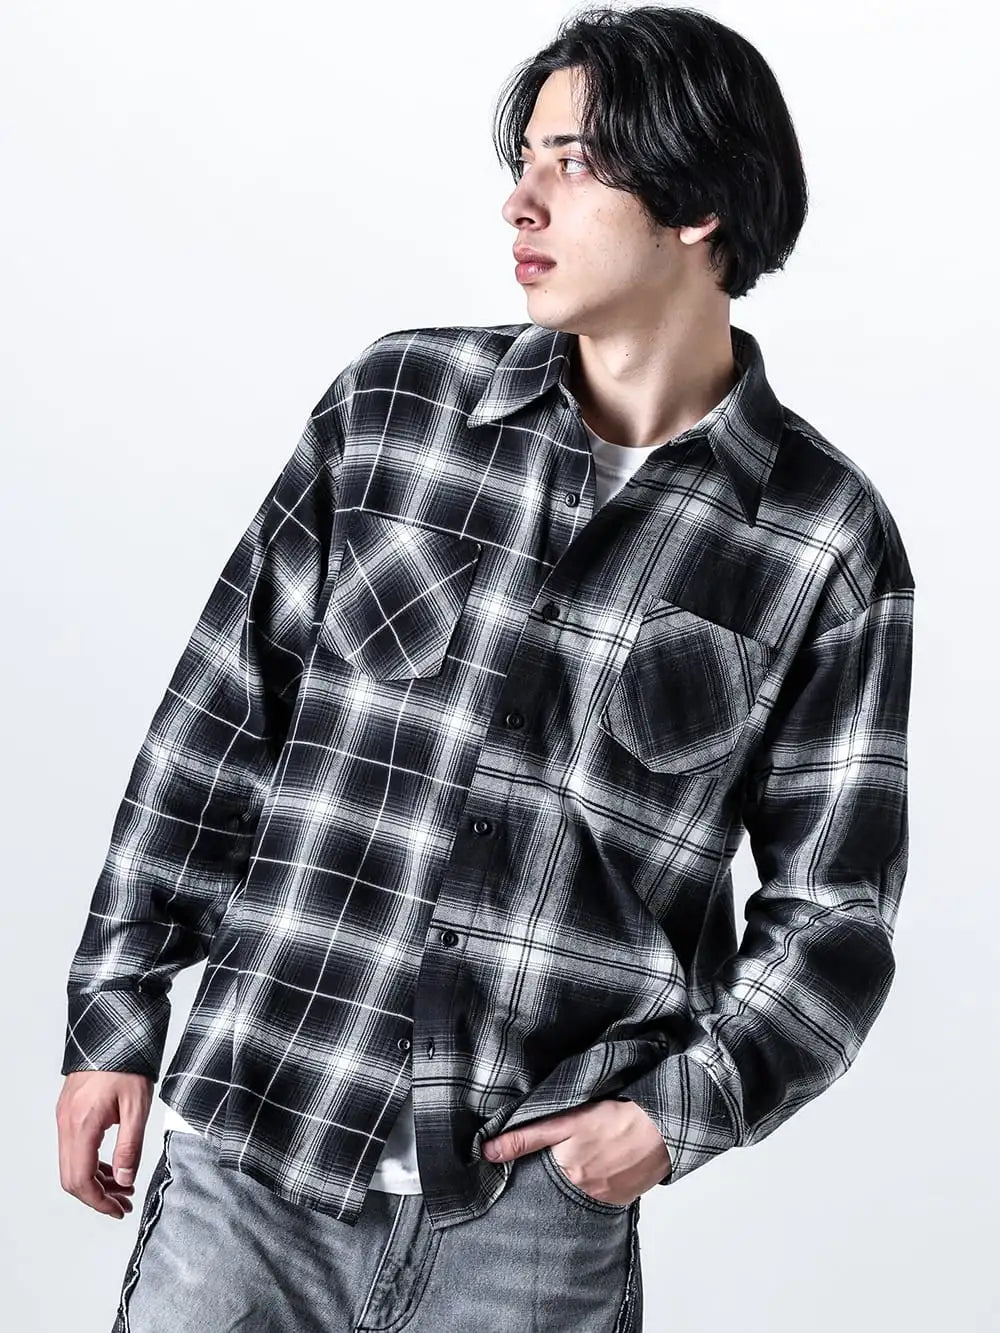 RAFU 24SS STYLING  - Checked shirts with a non-mainstream feel - Rafu008-Docking shirt black - 16102-Black_CL-Twisted 3D sarouel denim black CL 2-001